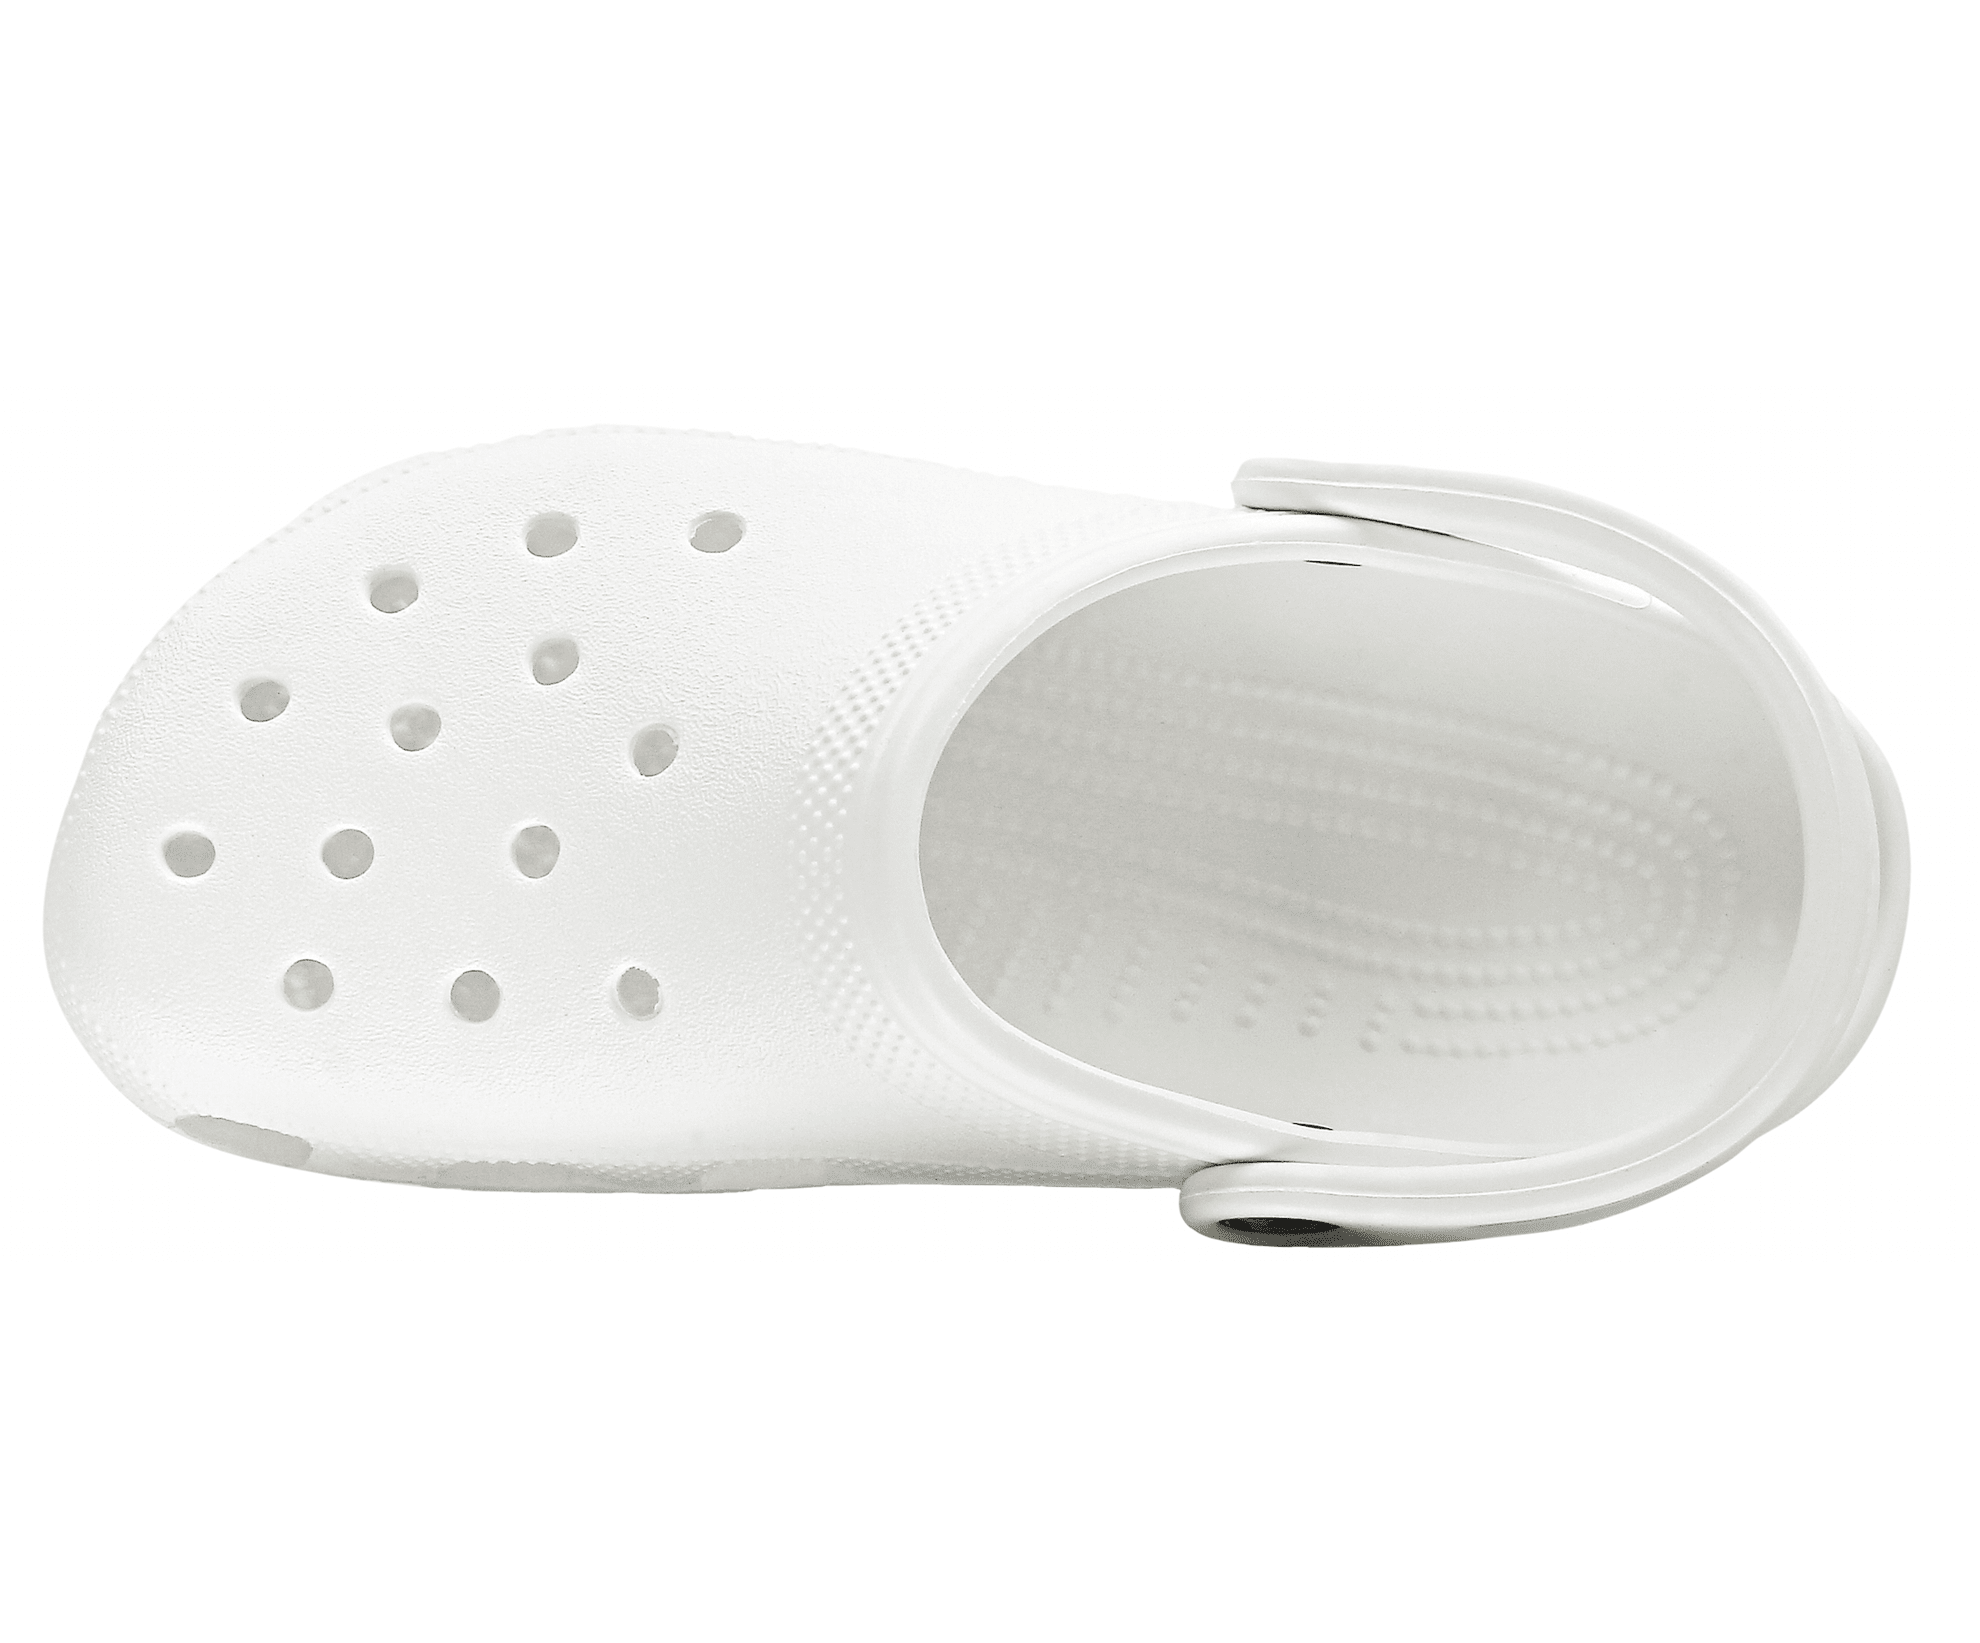 Crocs Unisex Classic Clog - White - The Foot Factory